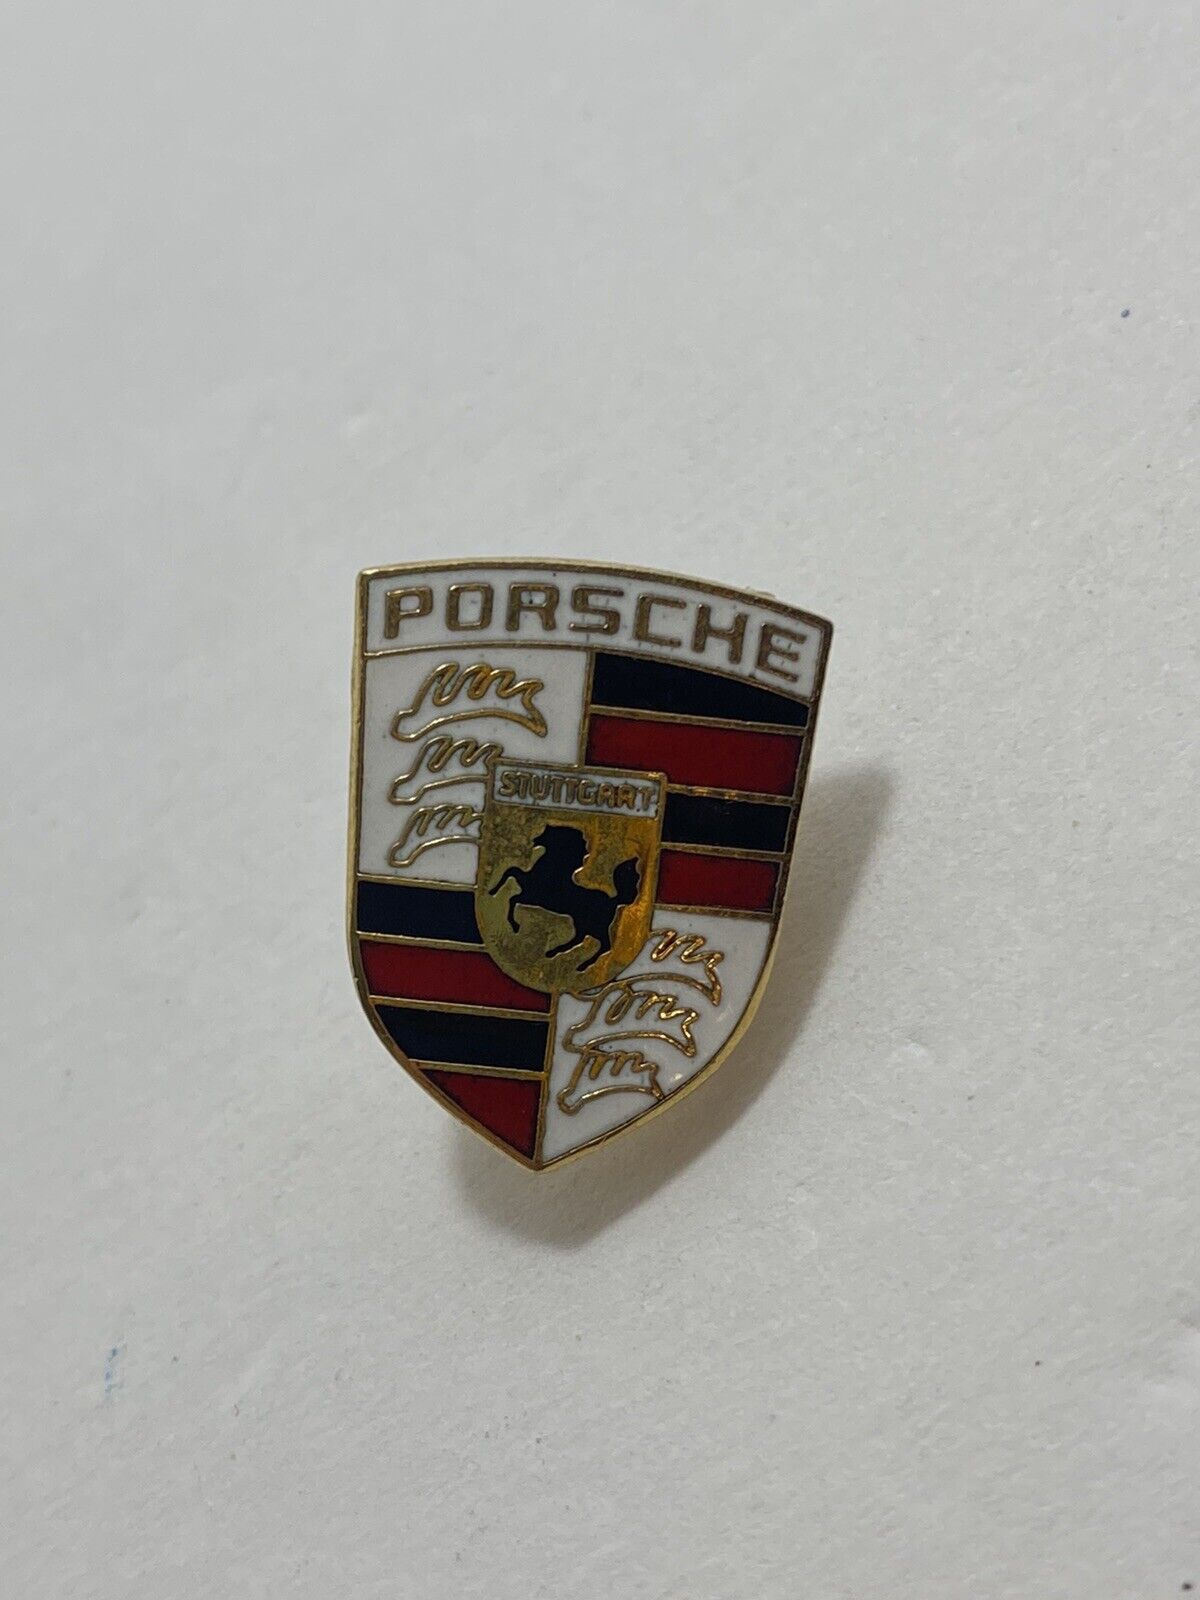 Vintage Porsche Car Driving Small Enamel Lapel Pin Pinback Collectible Marked AT